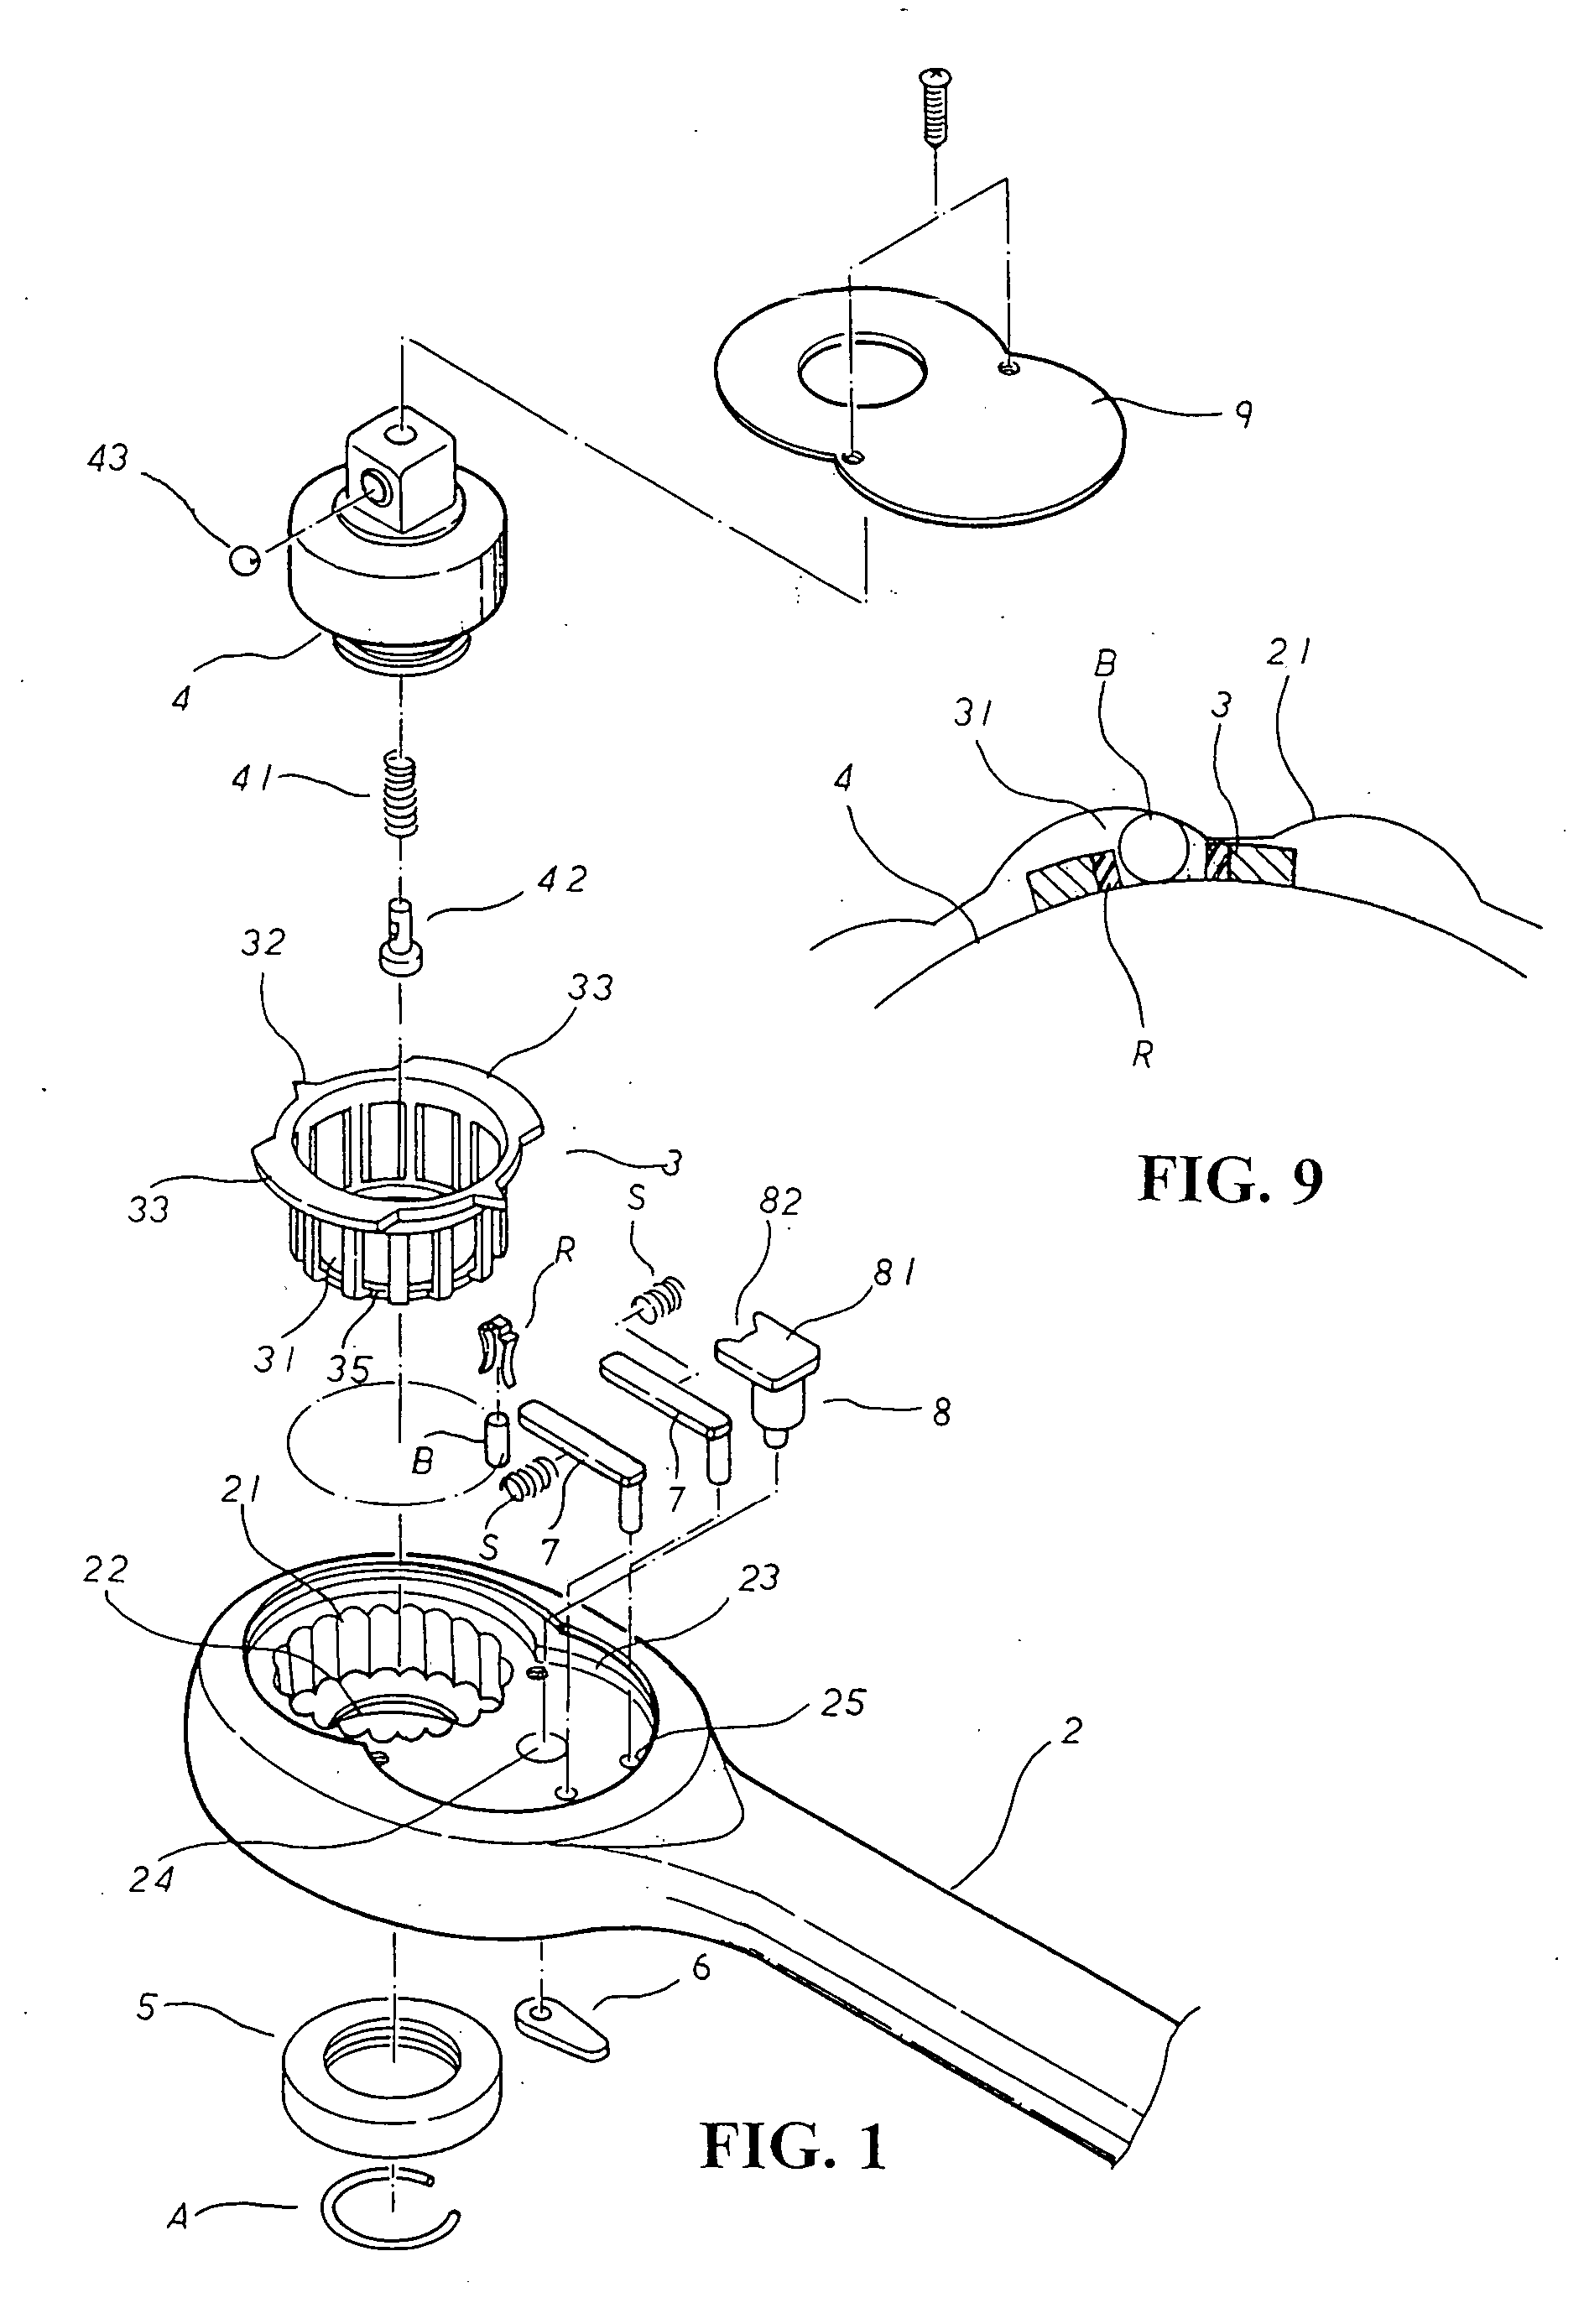 Torque-indicating socket wrench control mechanism